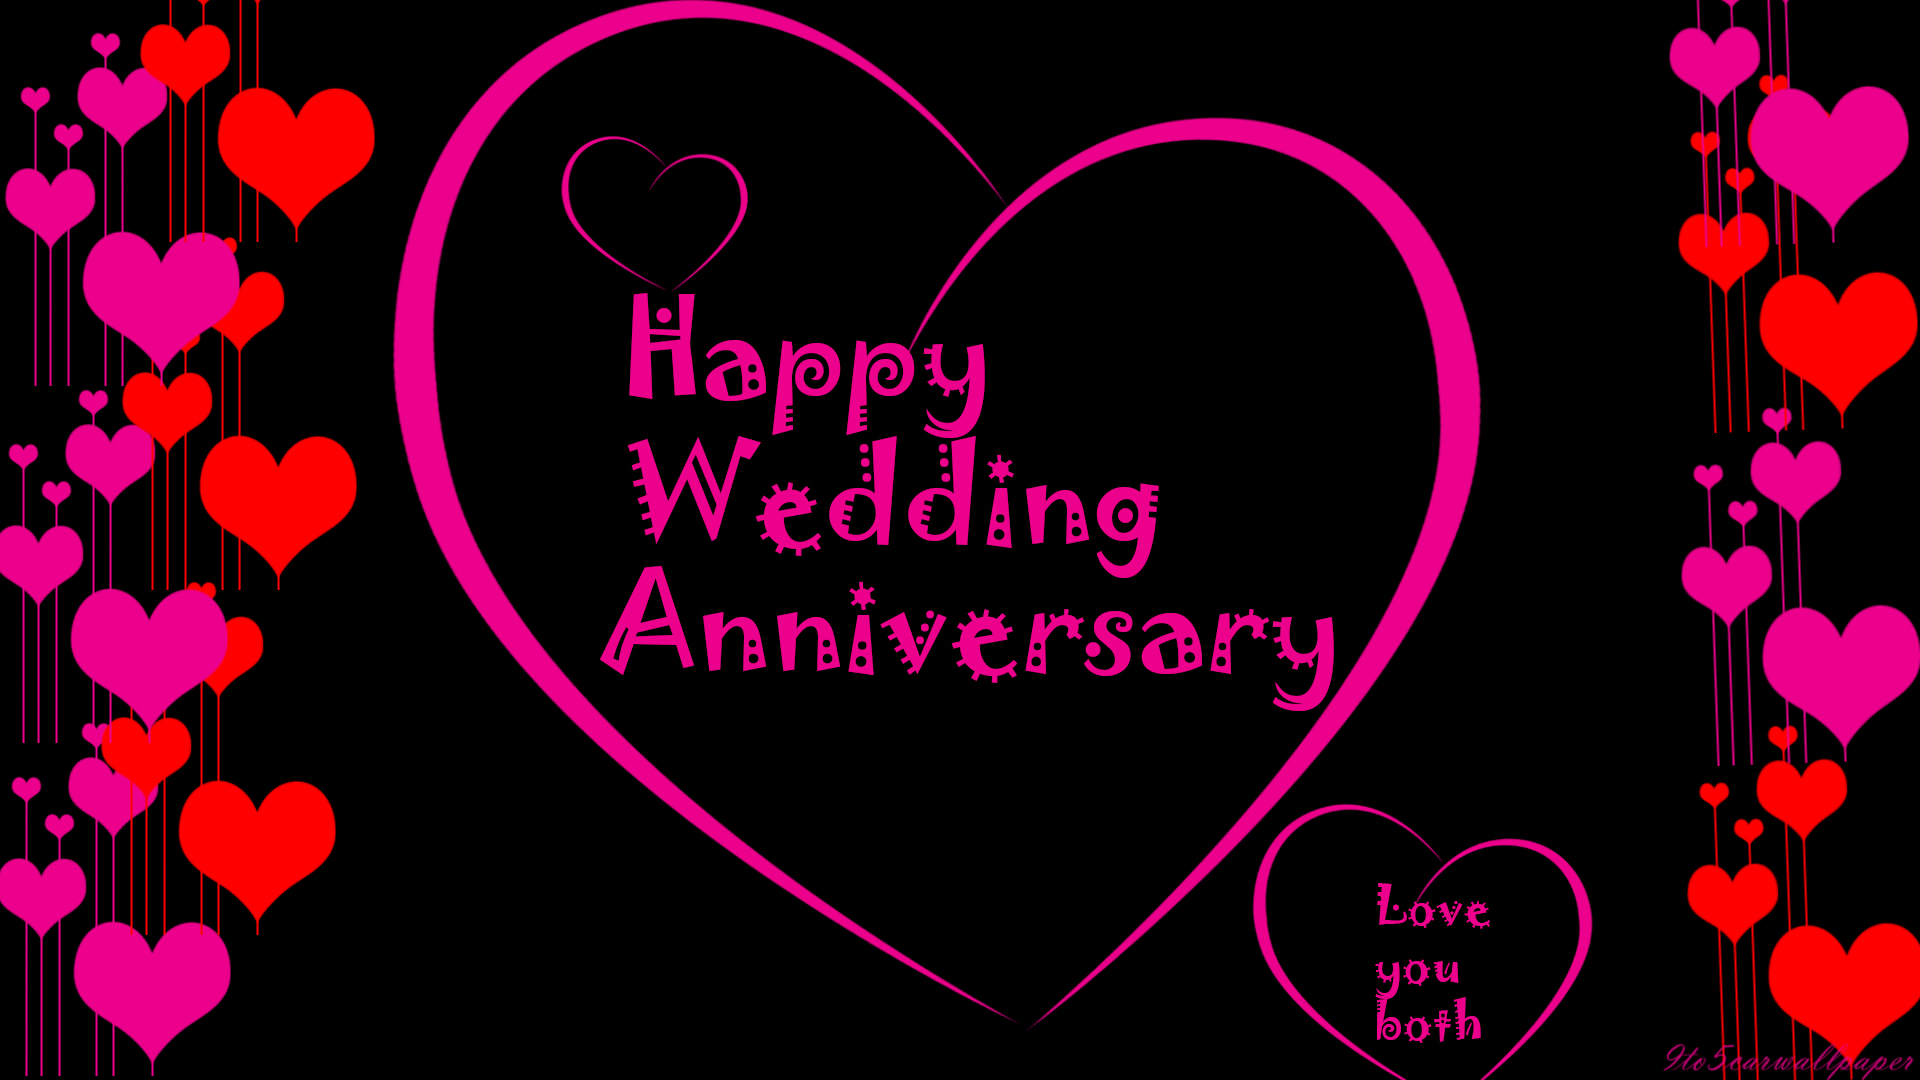 happy wedding anniversary images posters cards hd wallpapers 2017